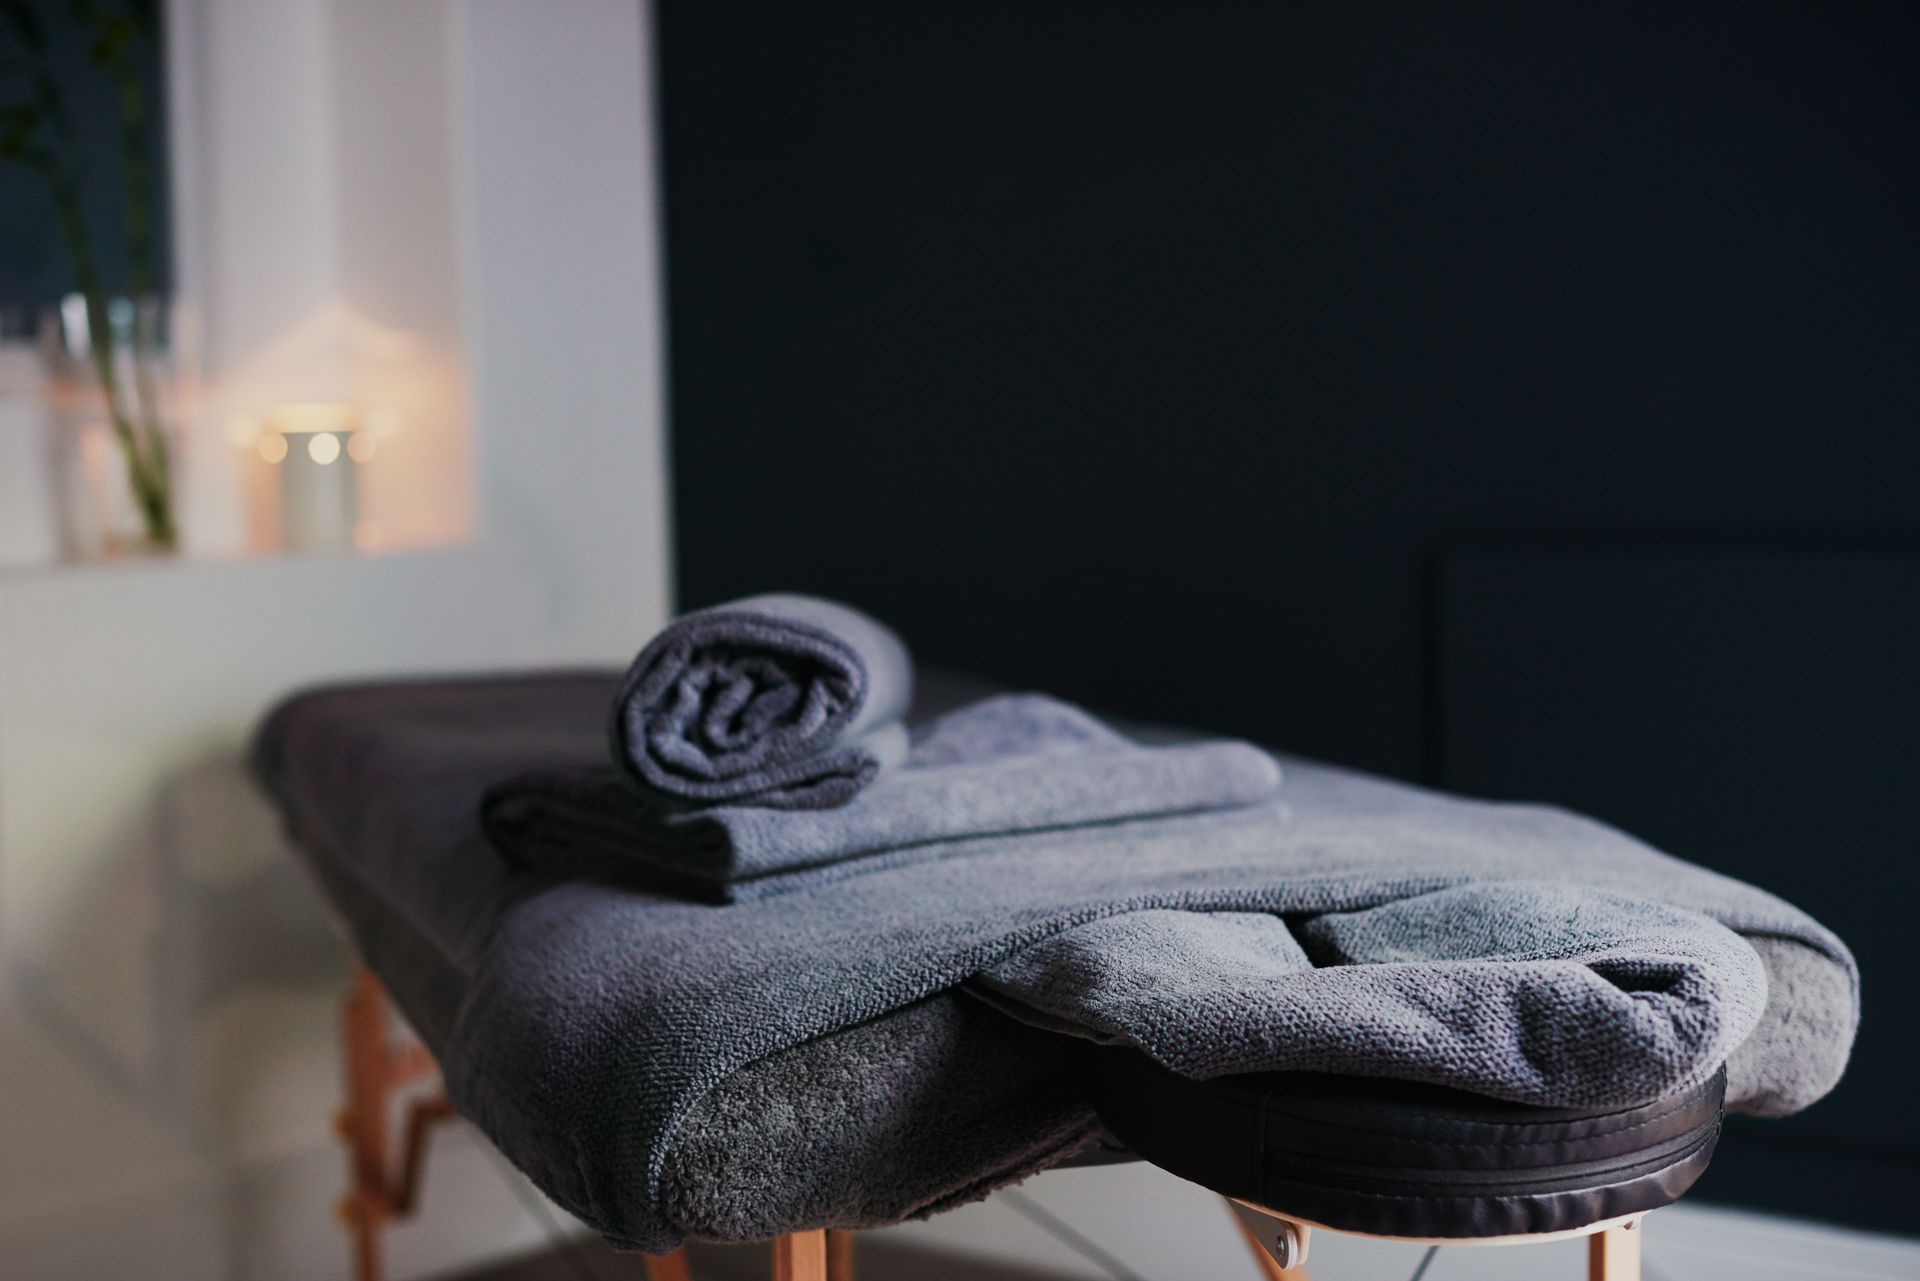 A massage table with towels on it in a dark room.